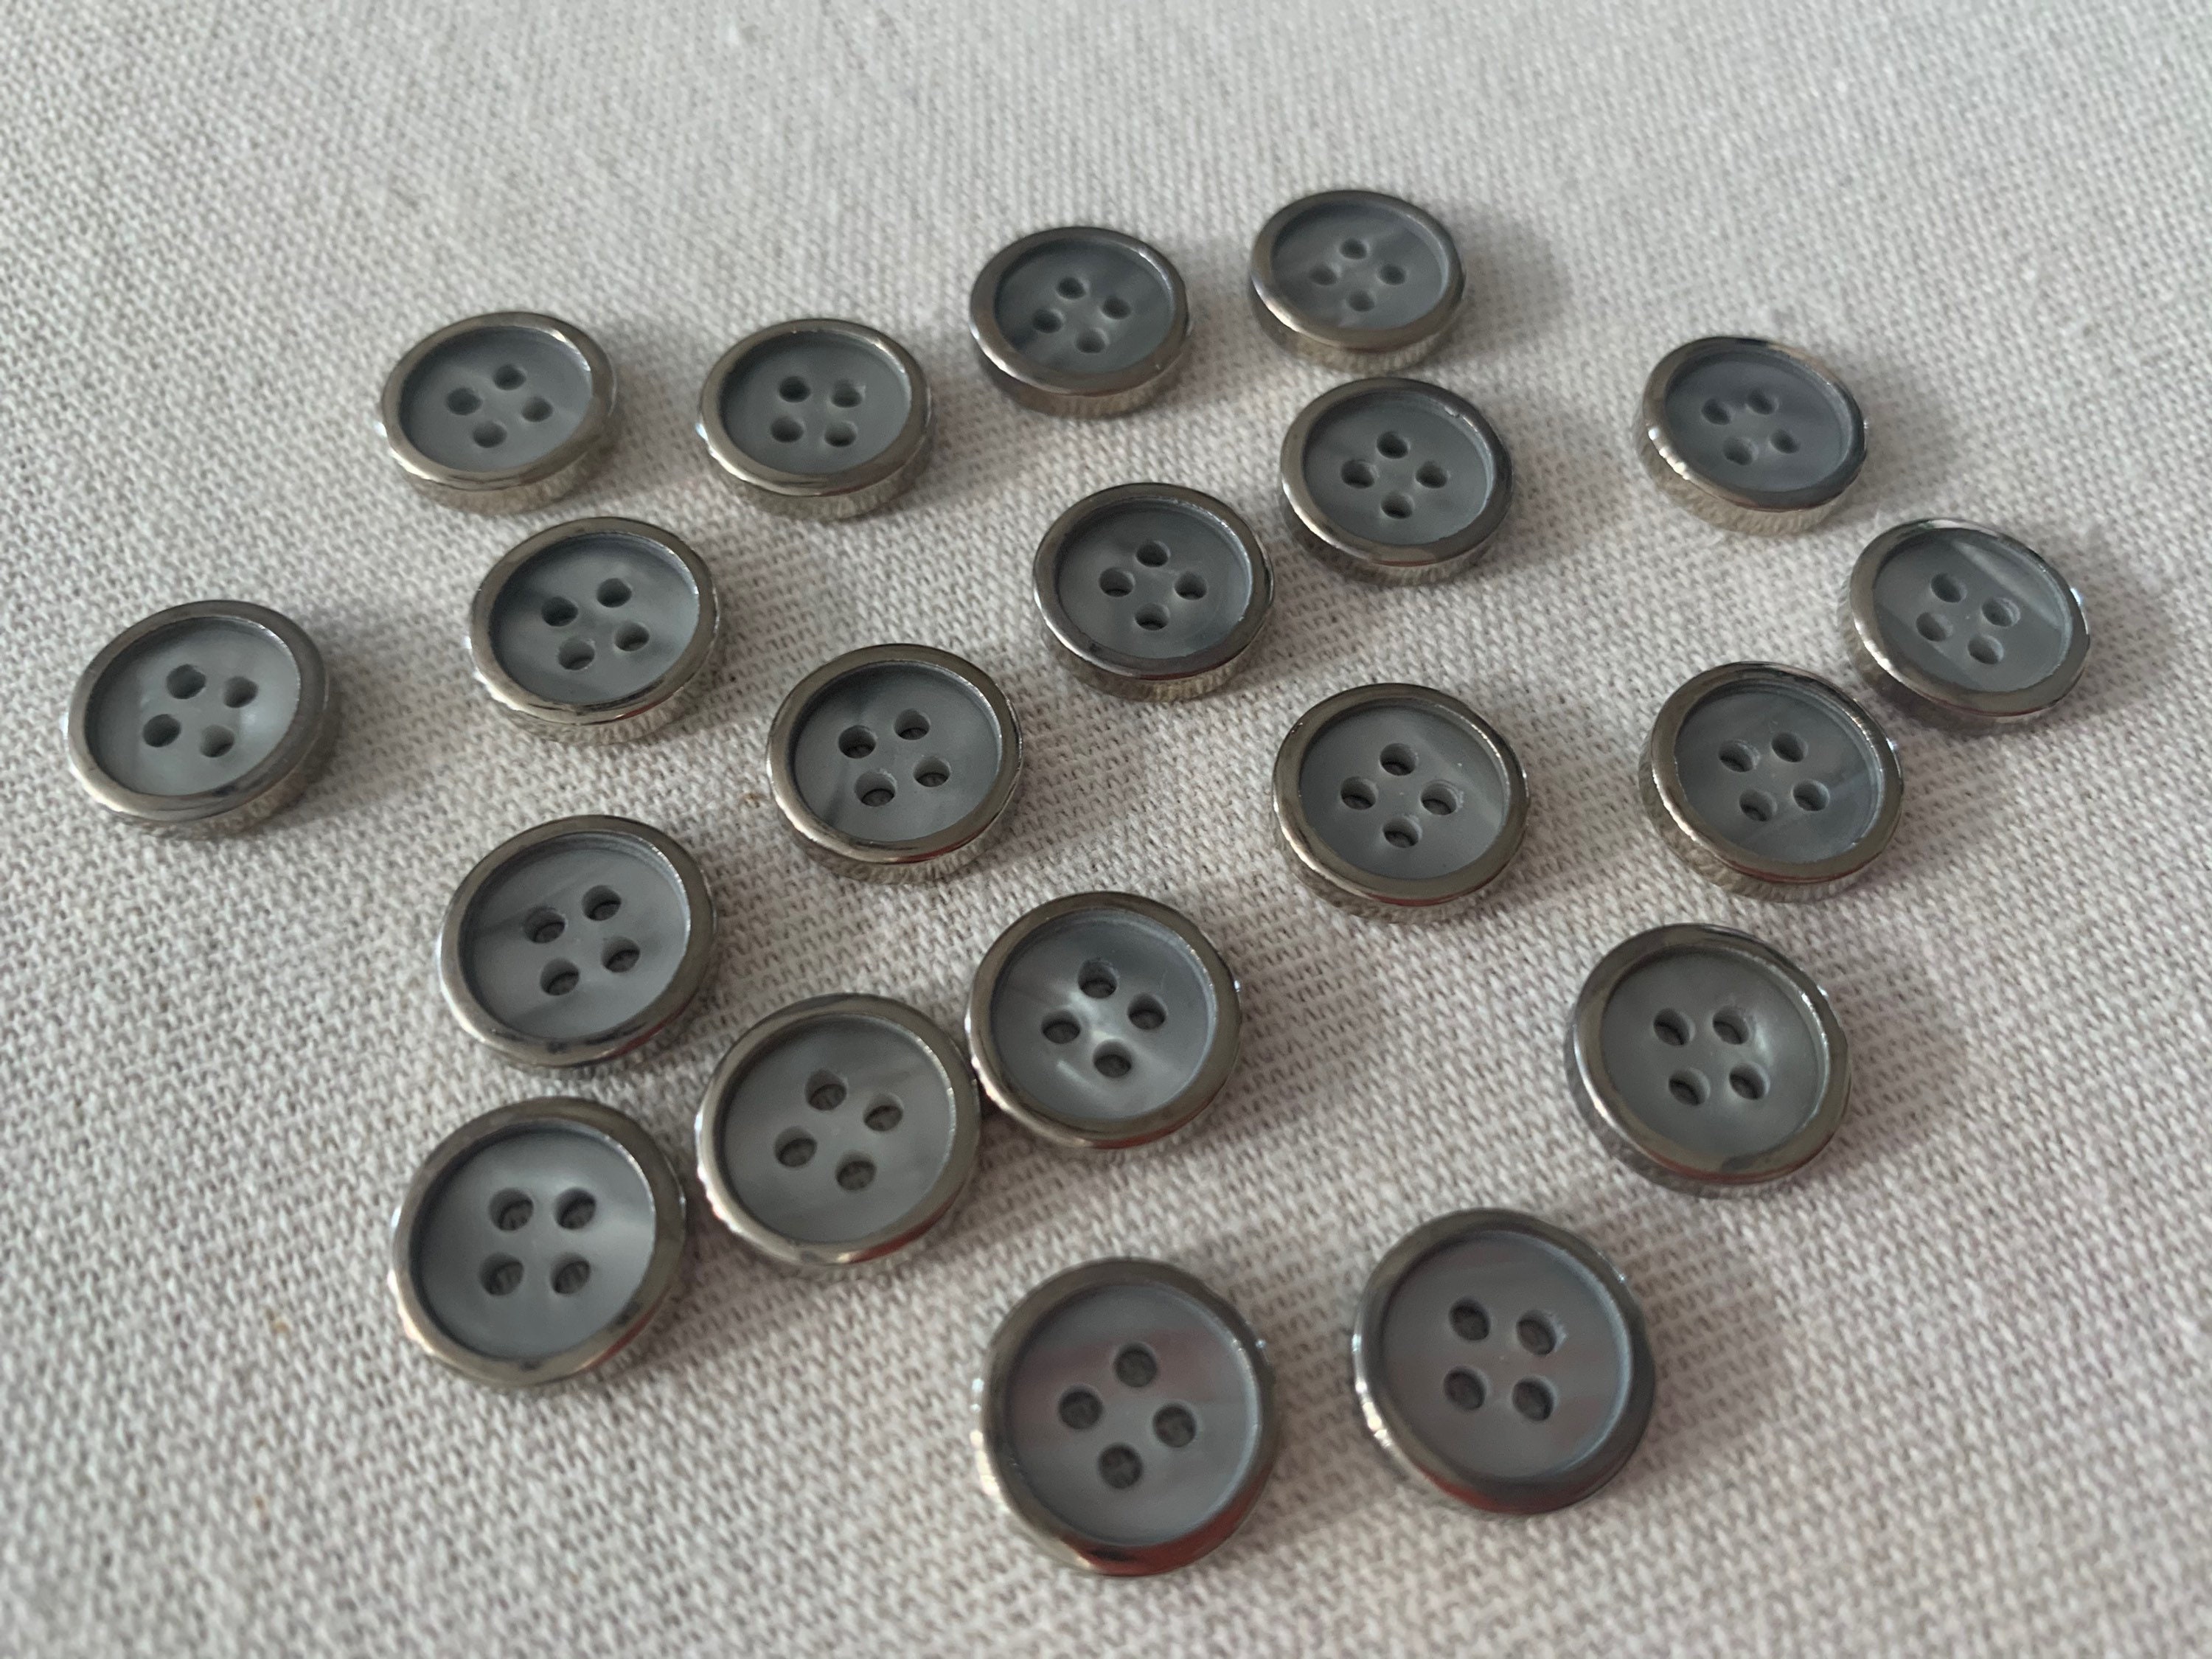 Small Silver buttons with a pearl like center sew through | Etsy